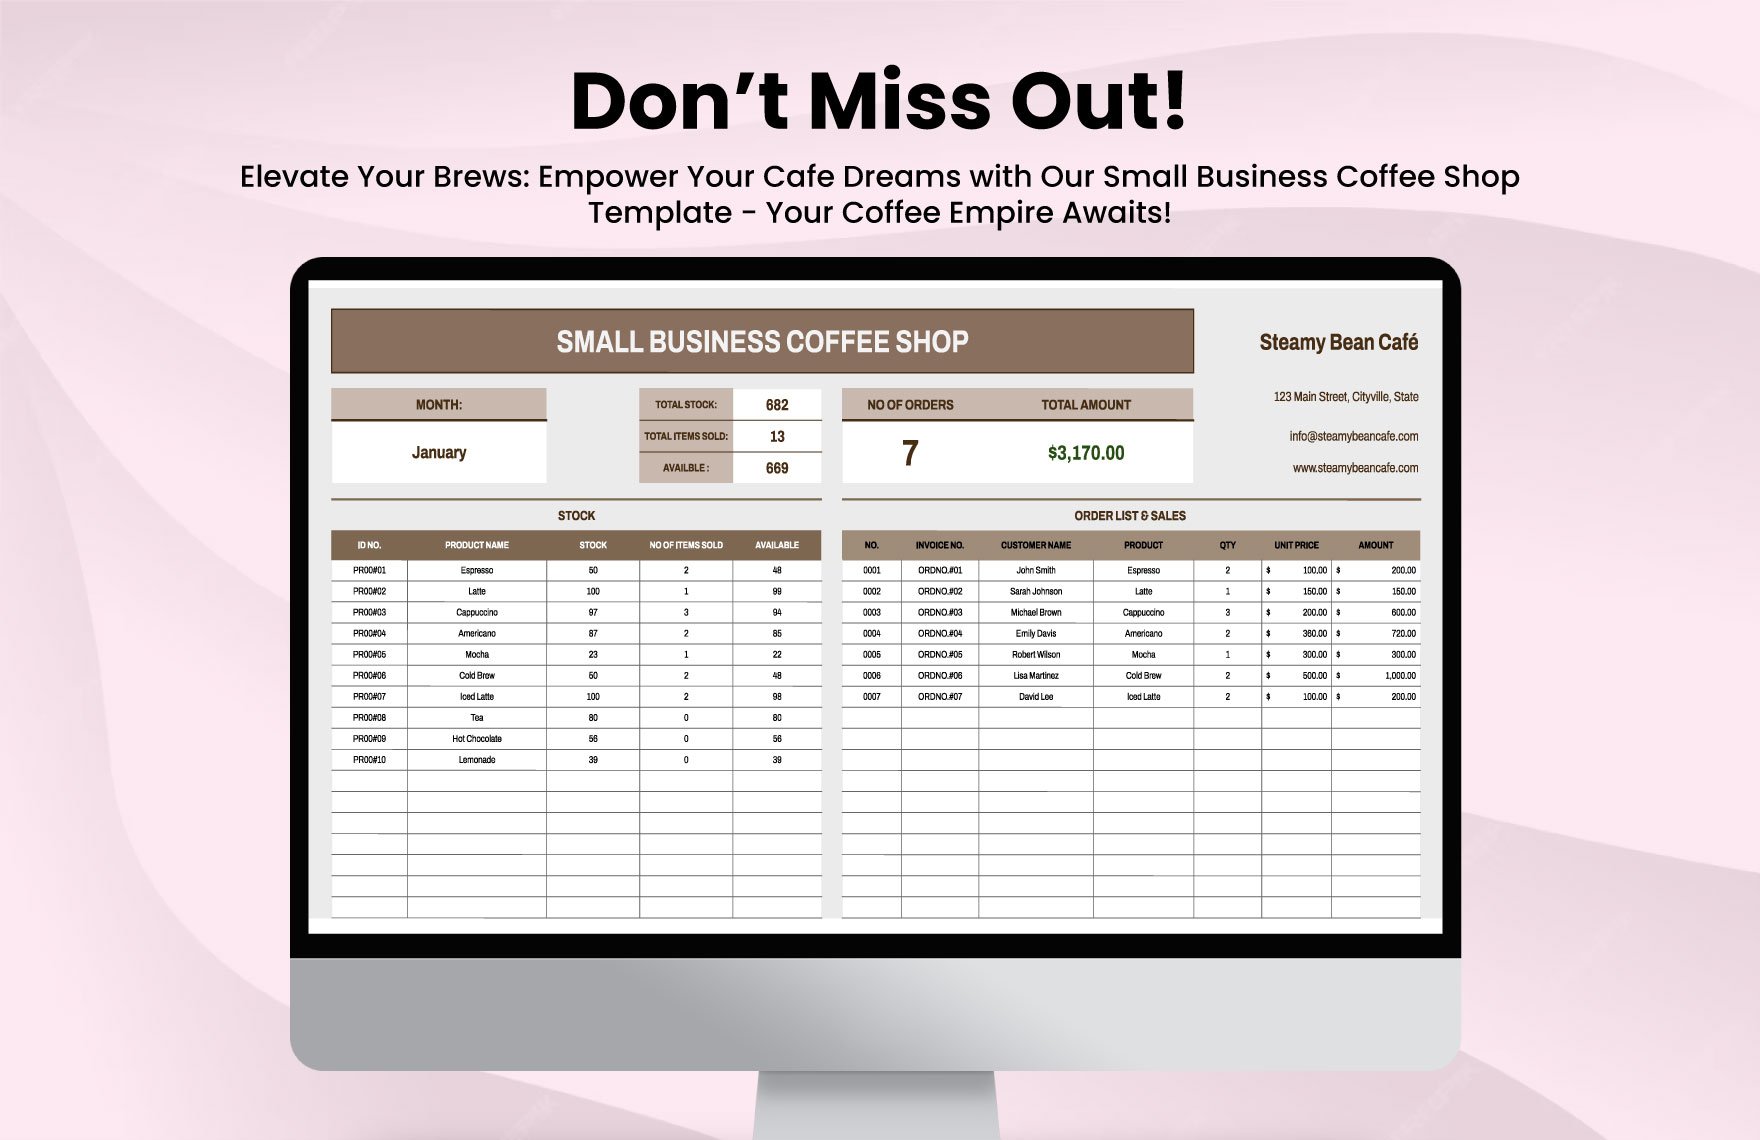 Small Business Coffee Shop Template